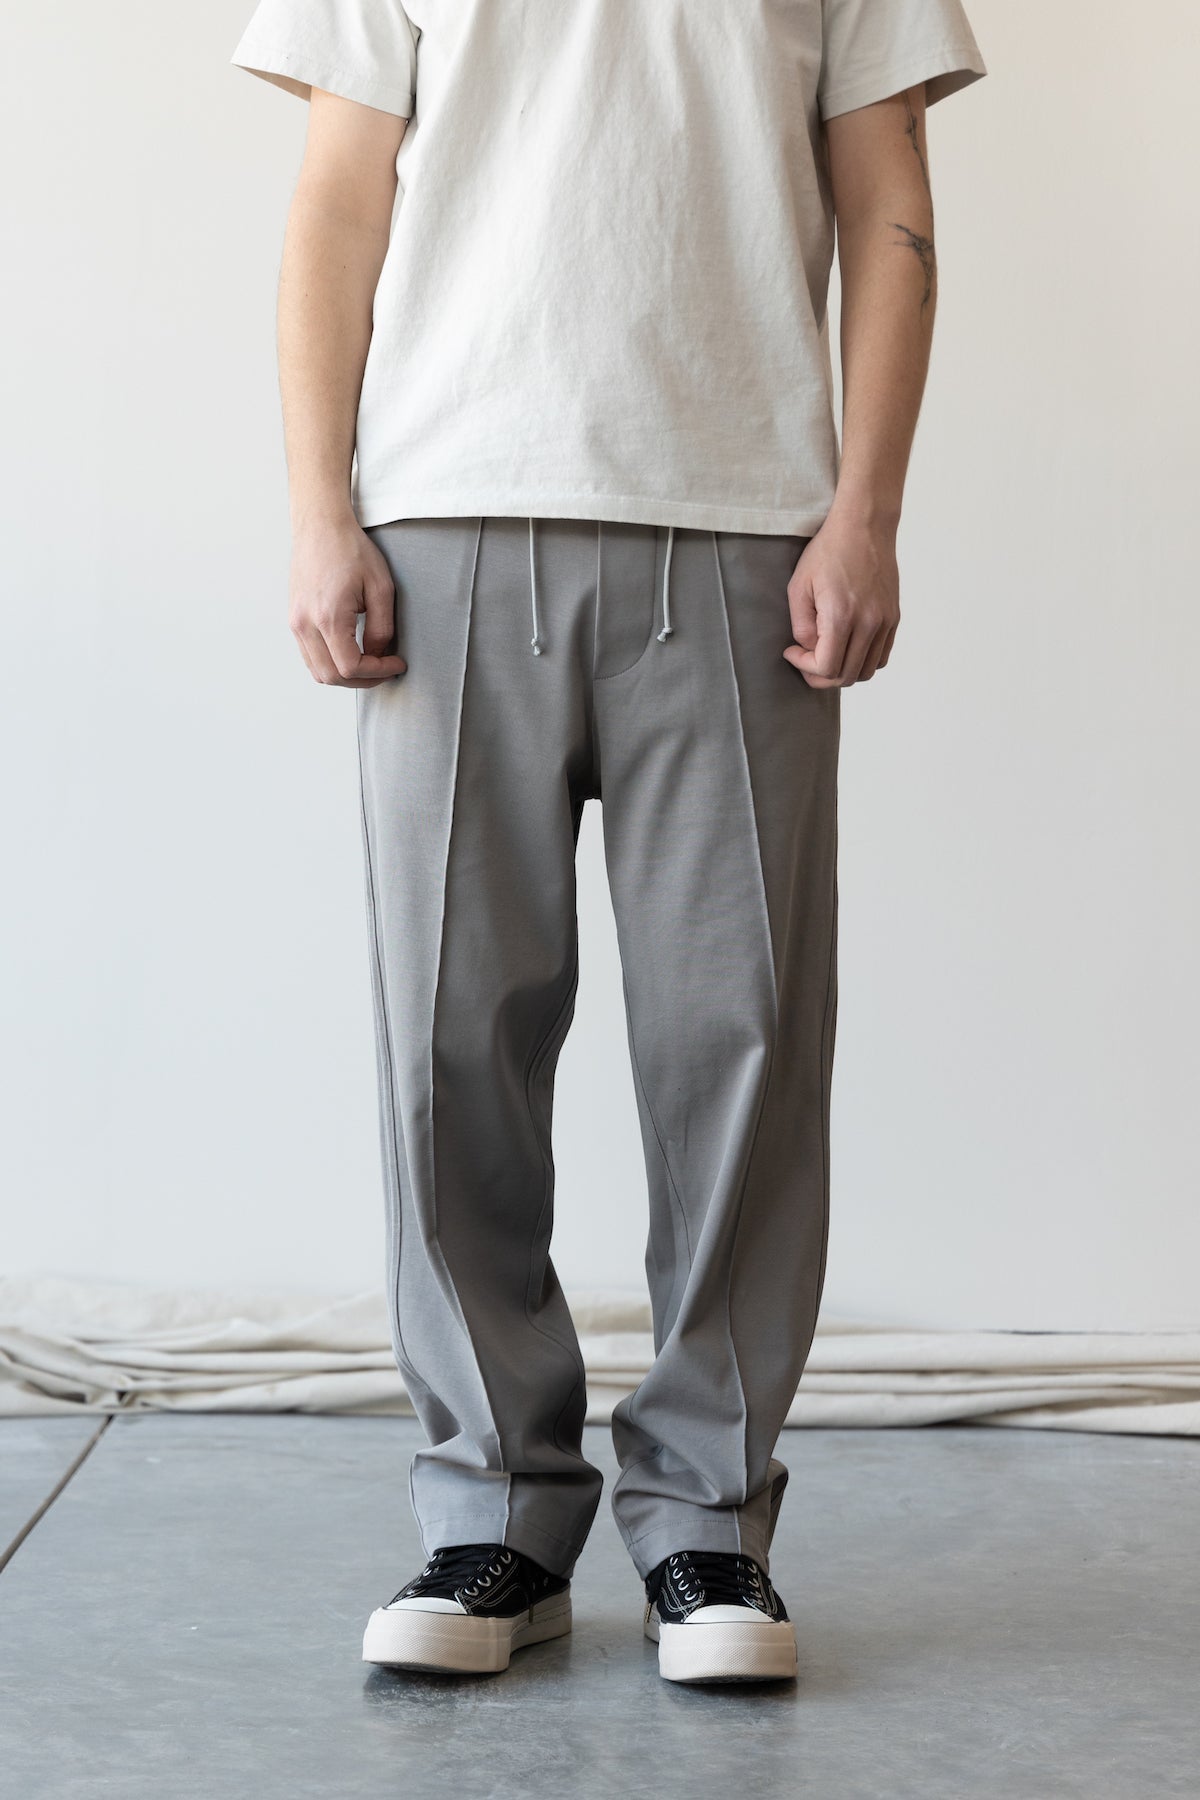 TEXTURED BAND PANT - SOLID GREY – LADY WHITE CO.